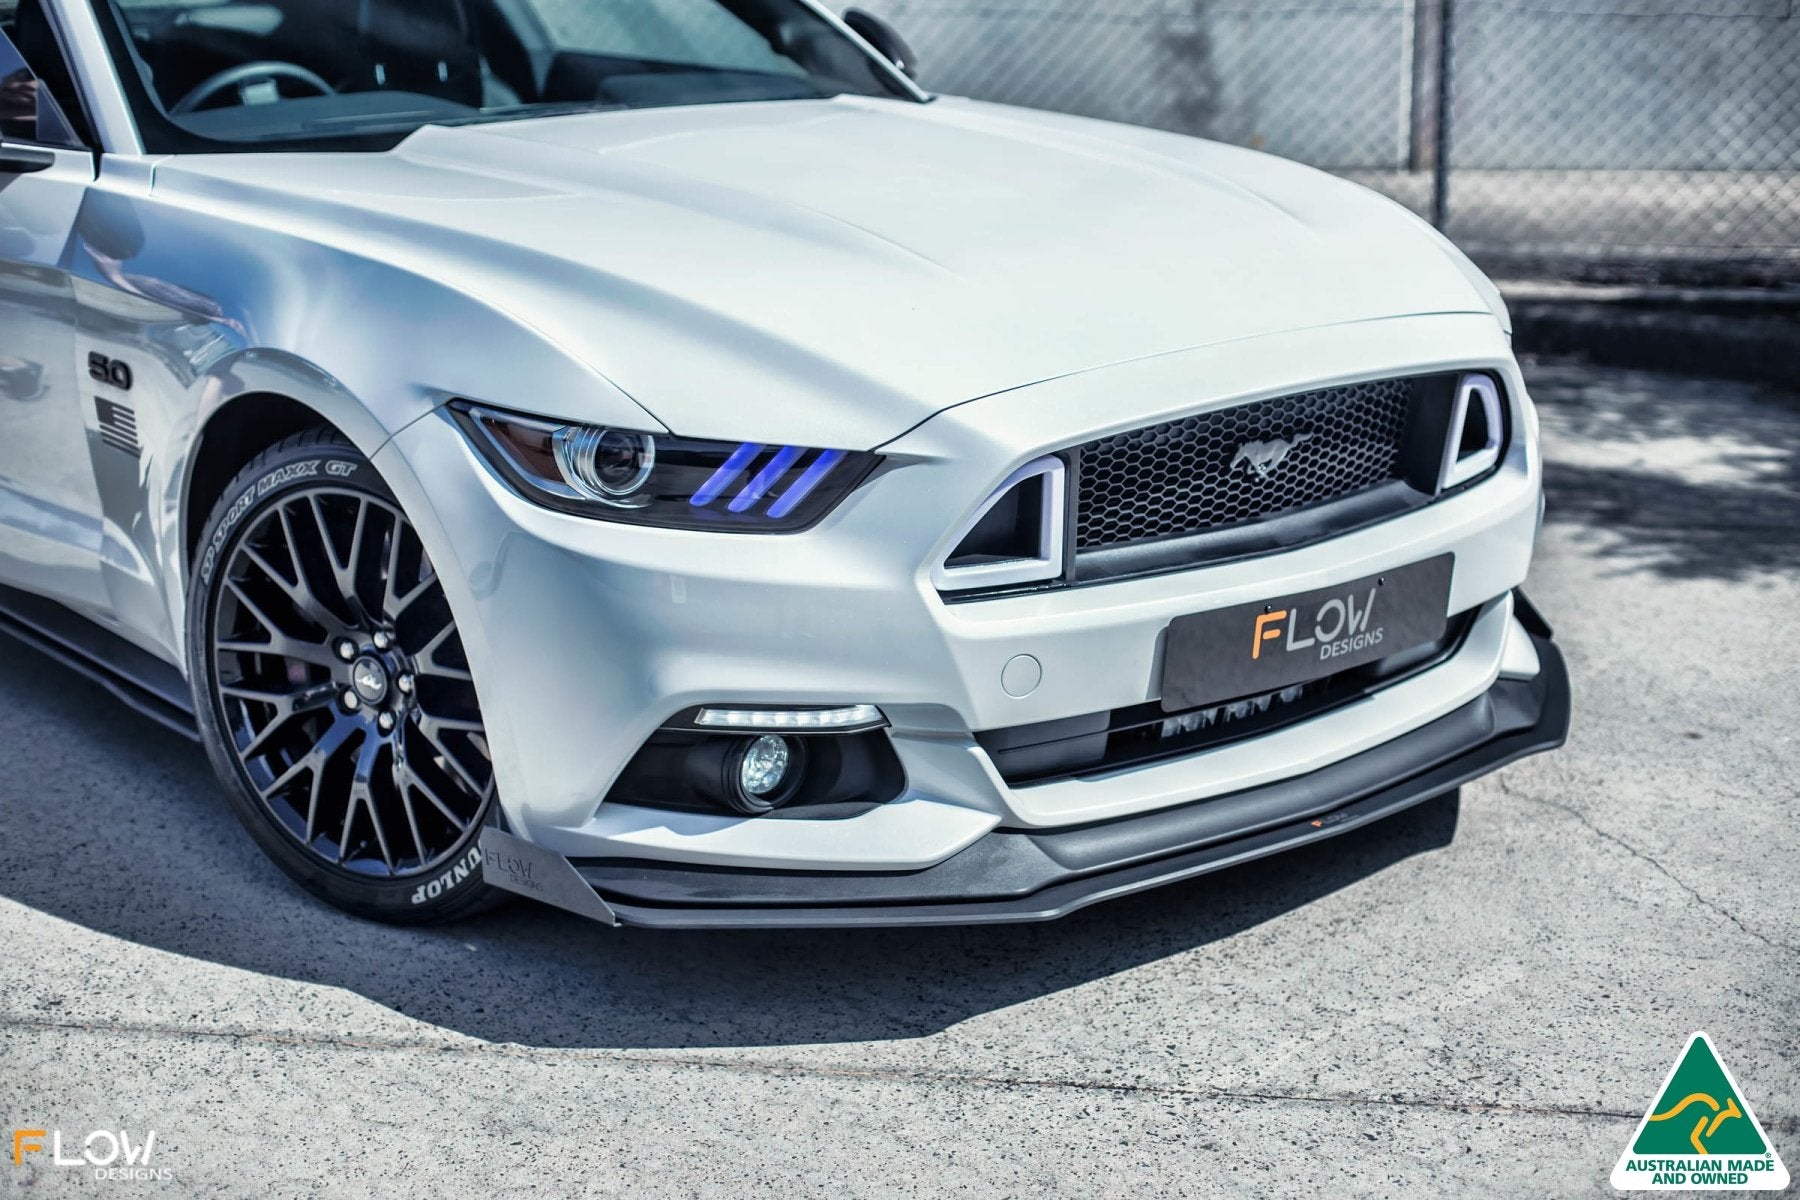 GT Mustang S550 FM Front Splitter Winglets (Pair) - MODE Auto Concepts